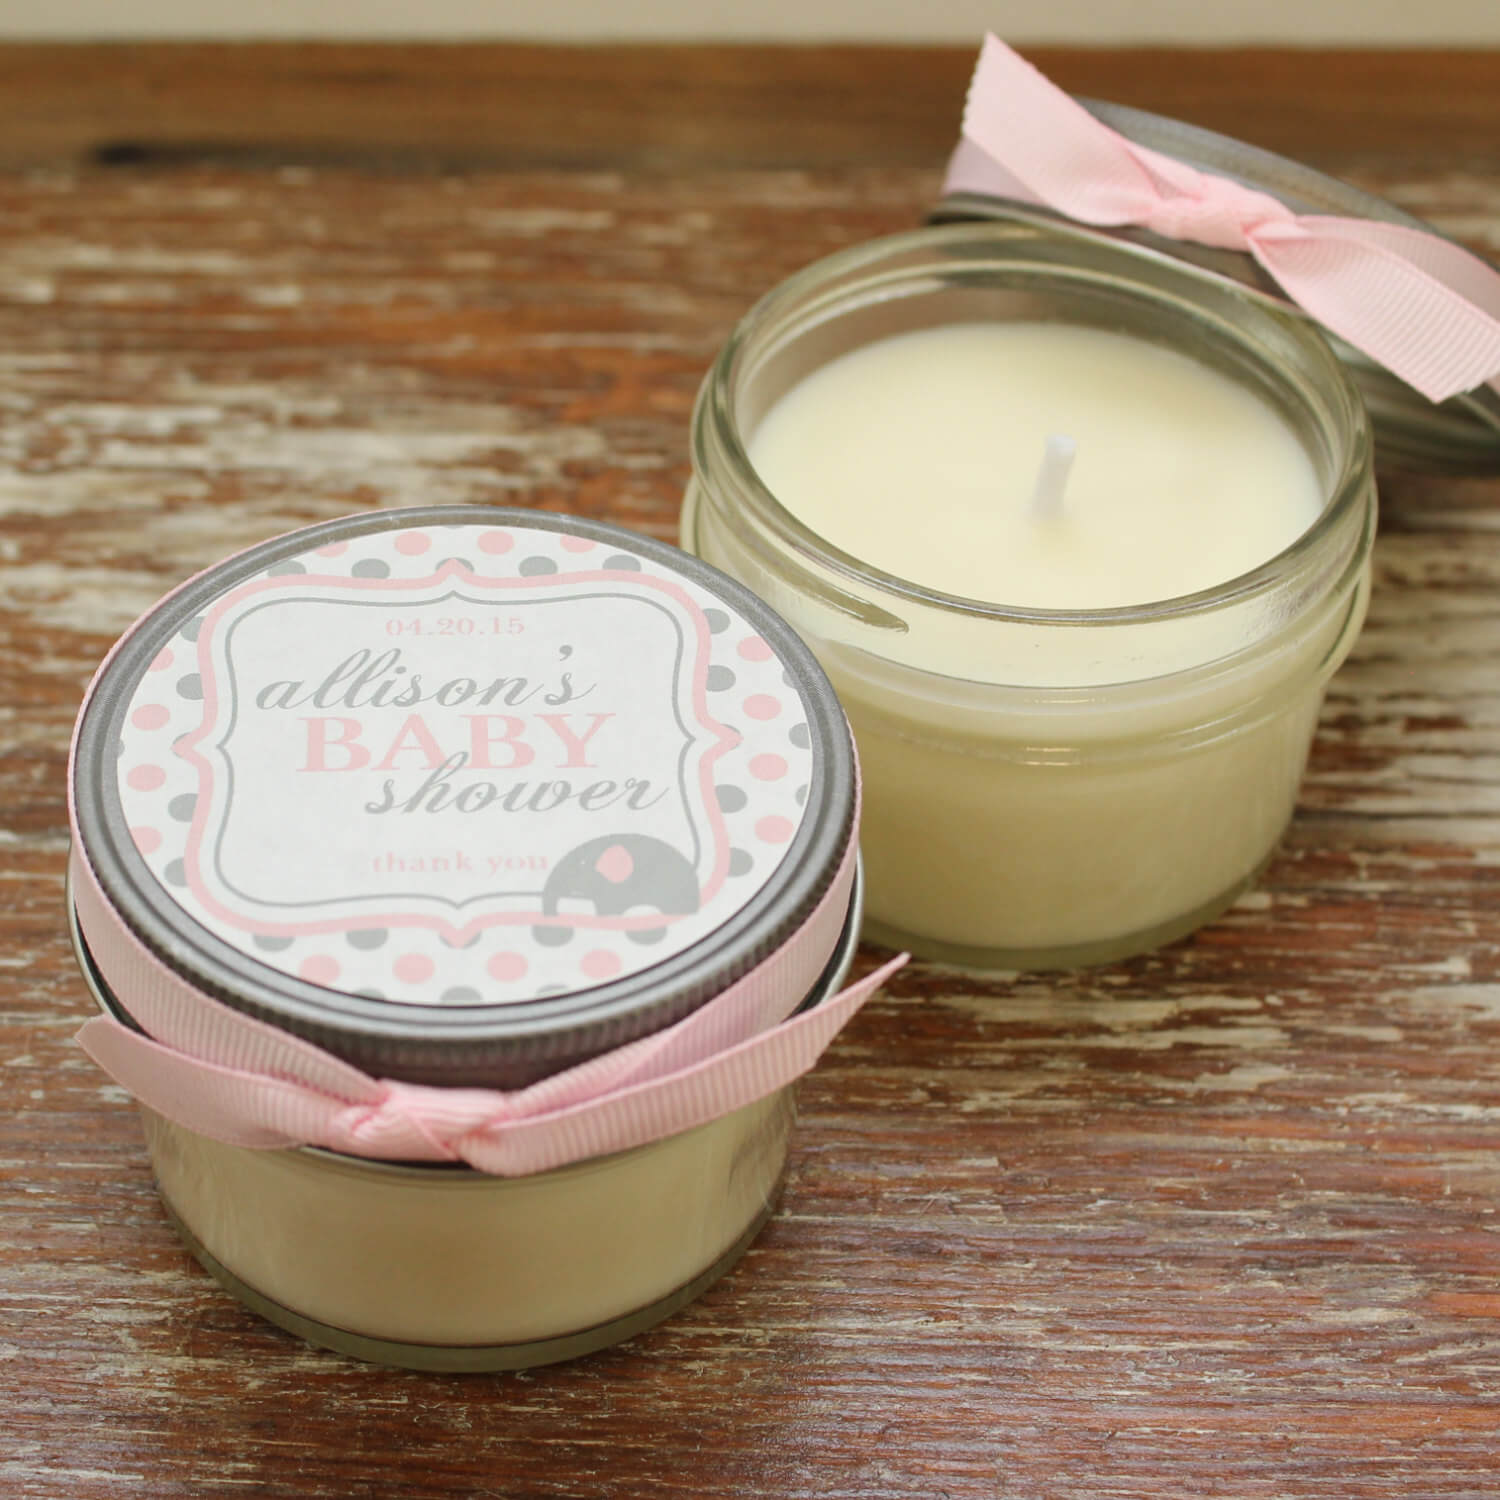 Baby Shower Favor Candles - Elephant Label Design - Girl Baby Shower Favors Boy Baby Sprinkle Soy Candle Favors